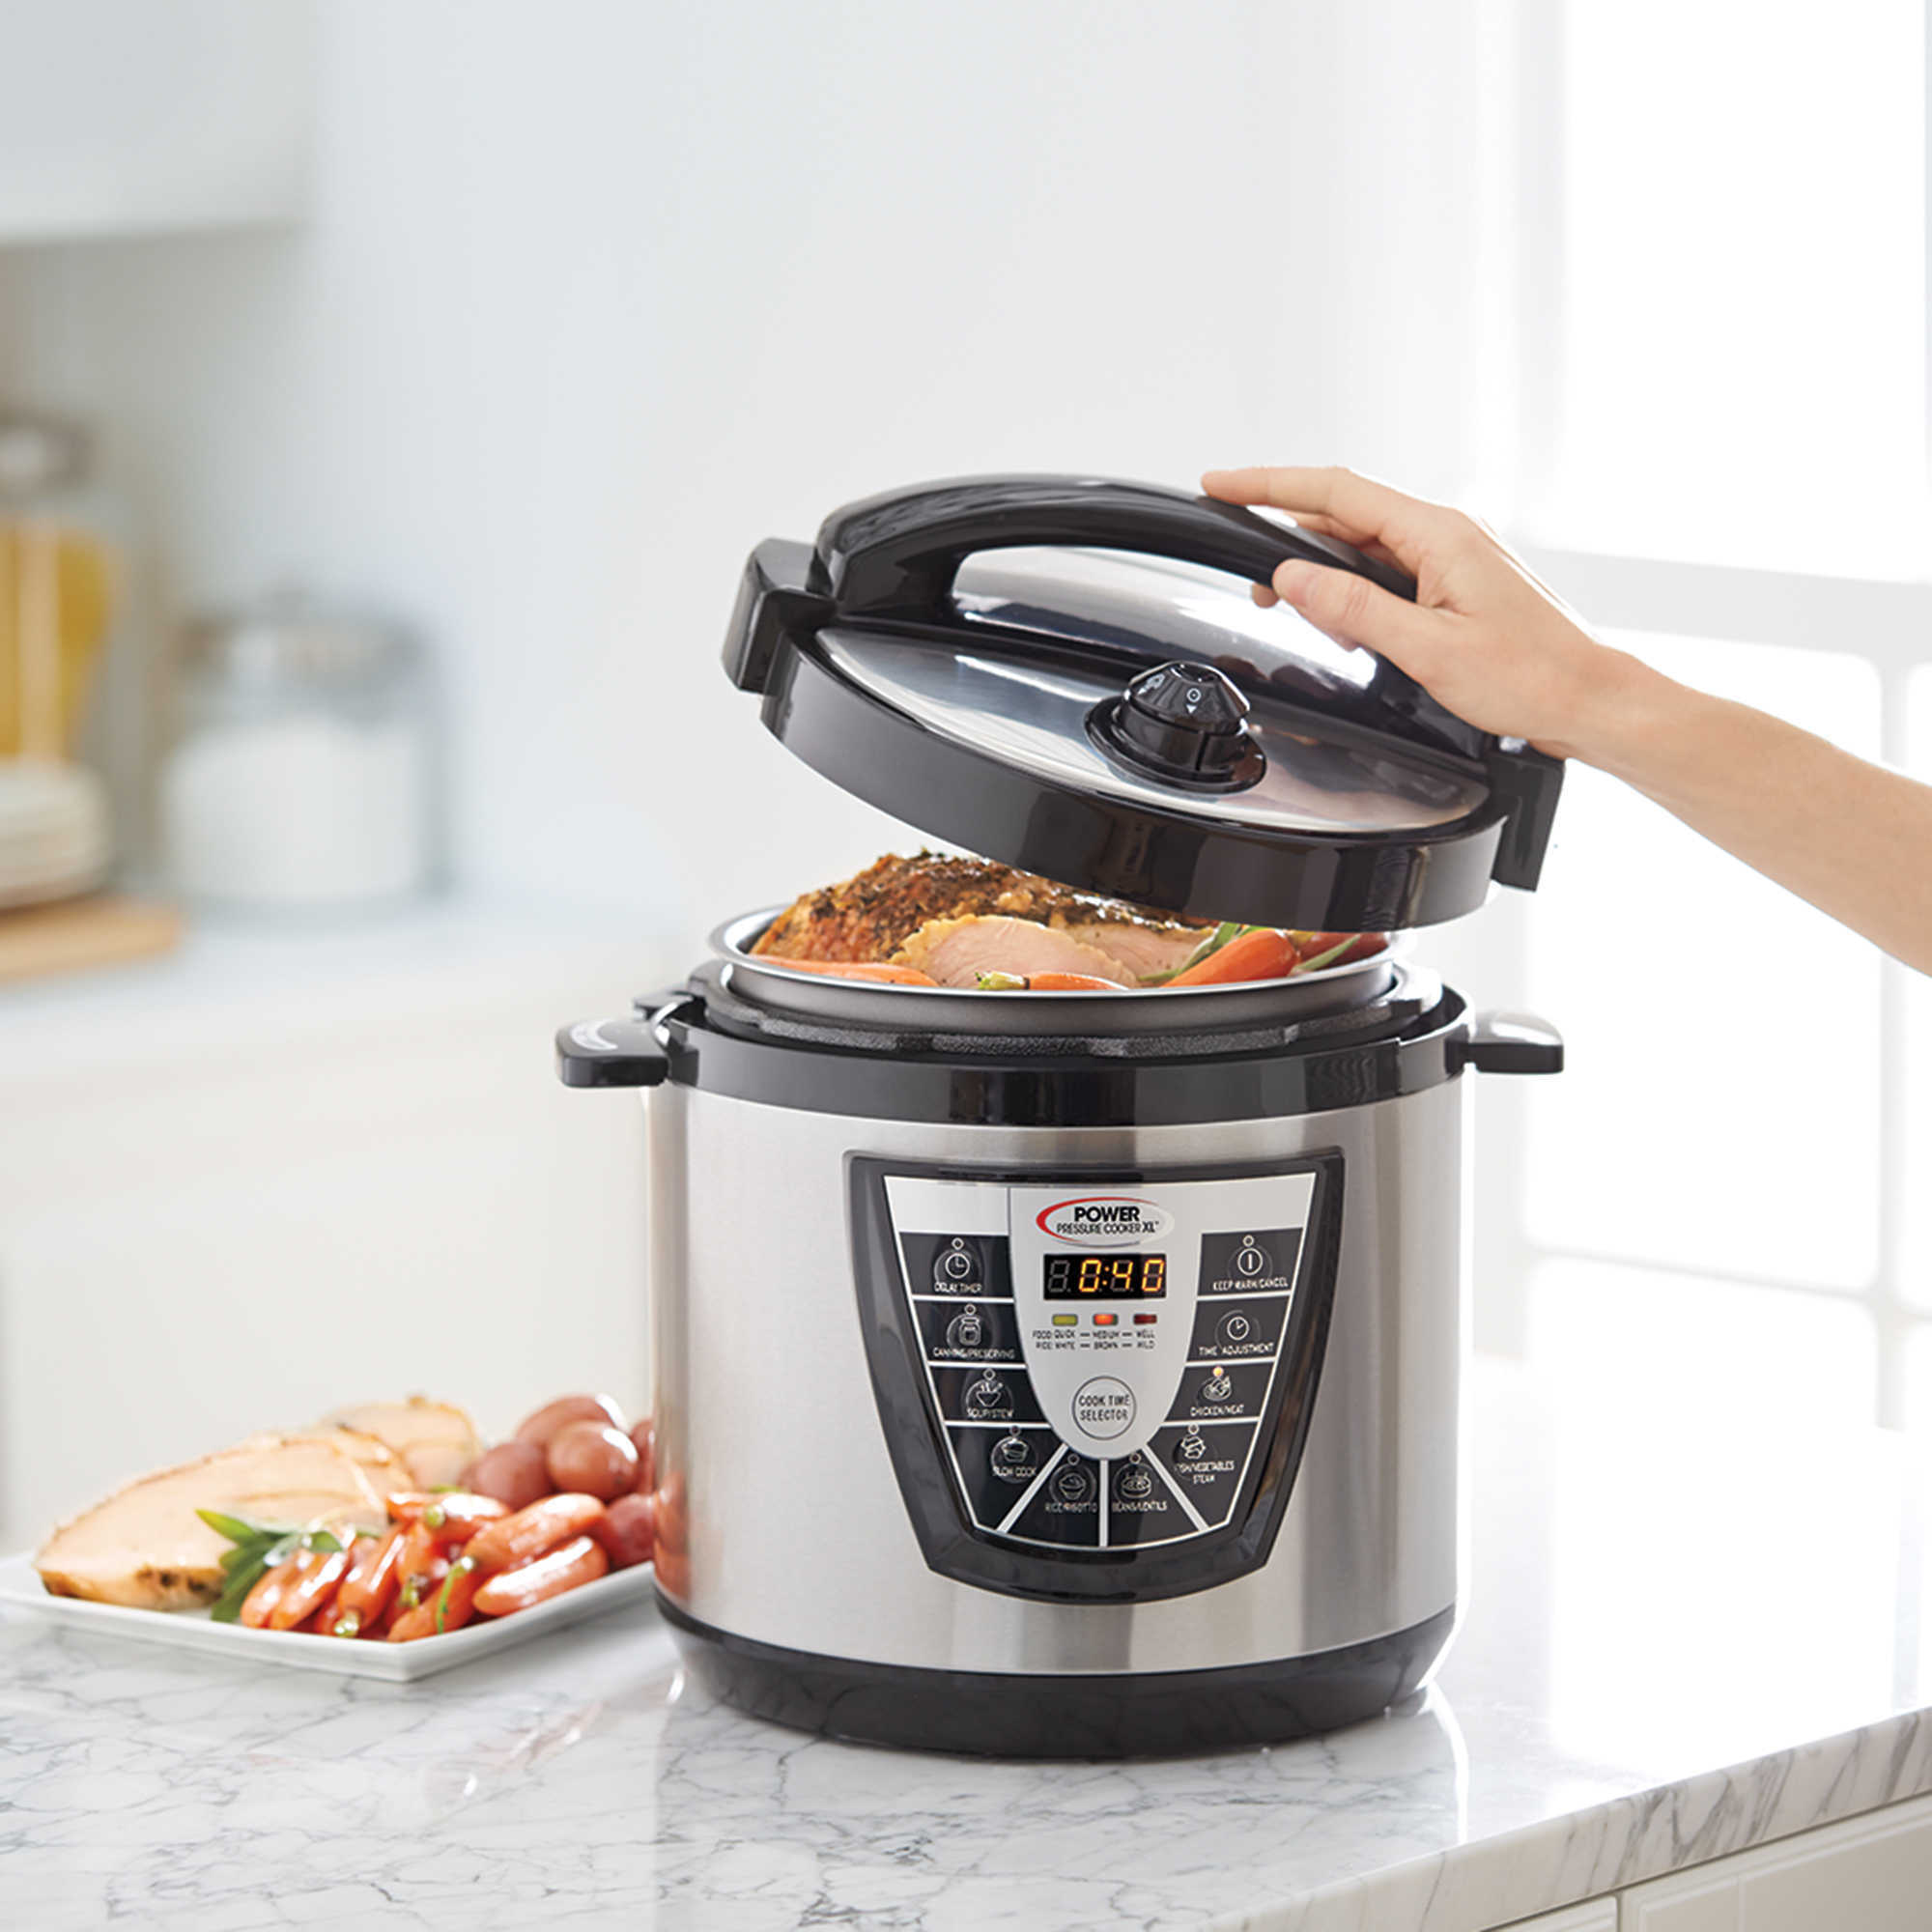 Power XL pressure cooker NEW! - appliances - by owner - sale